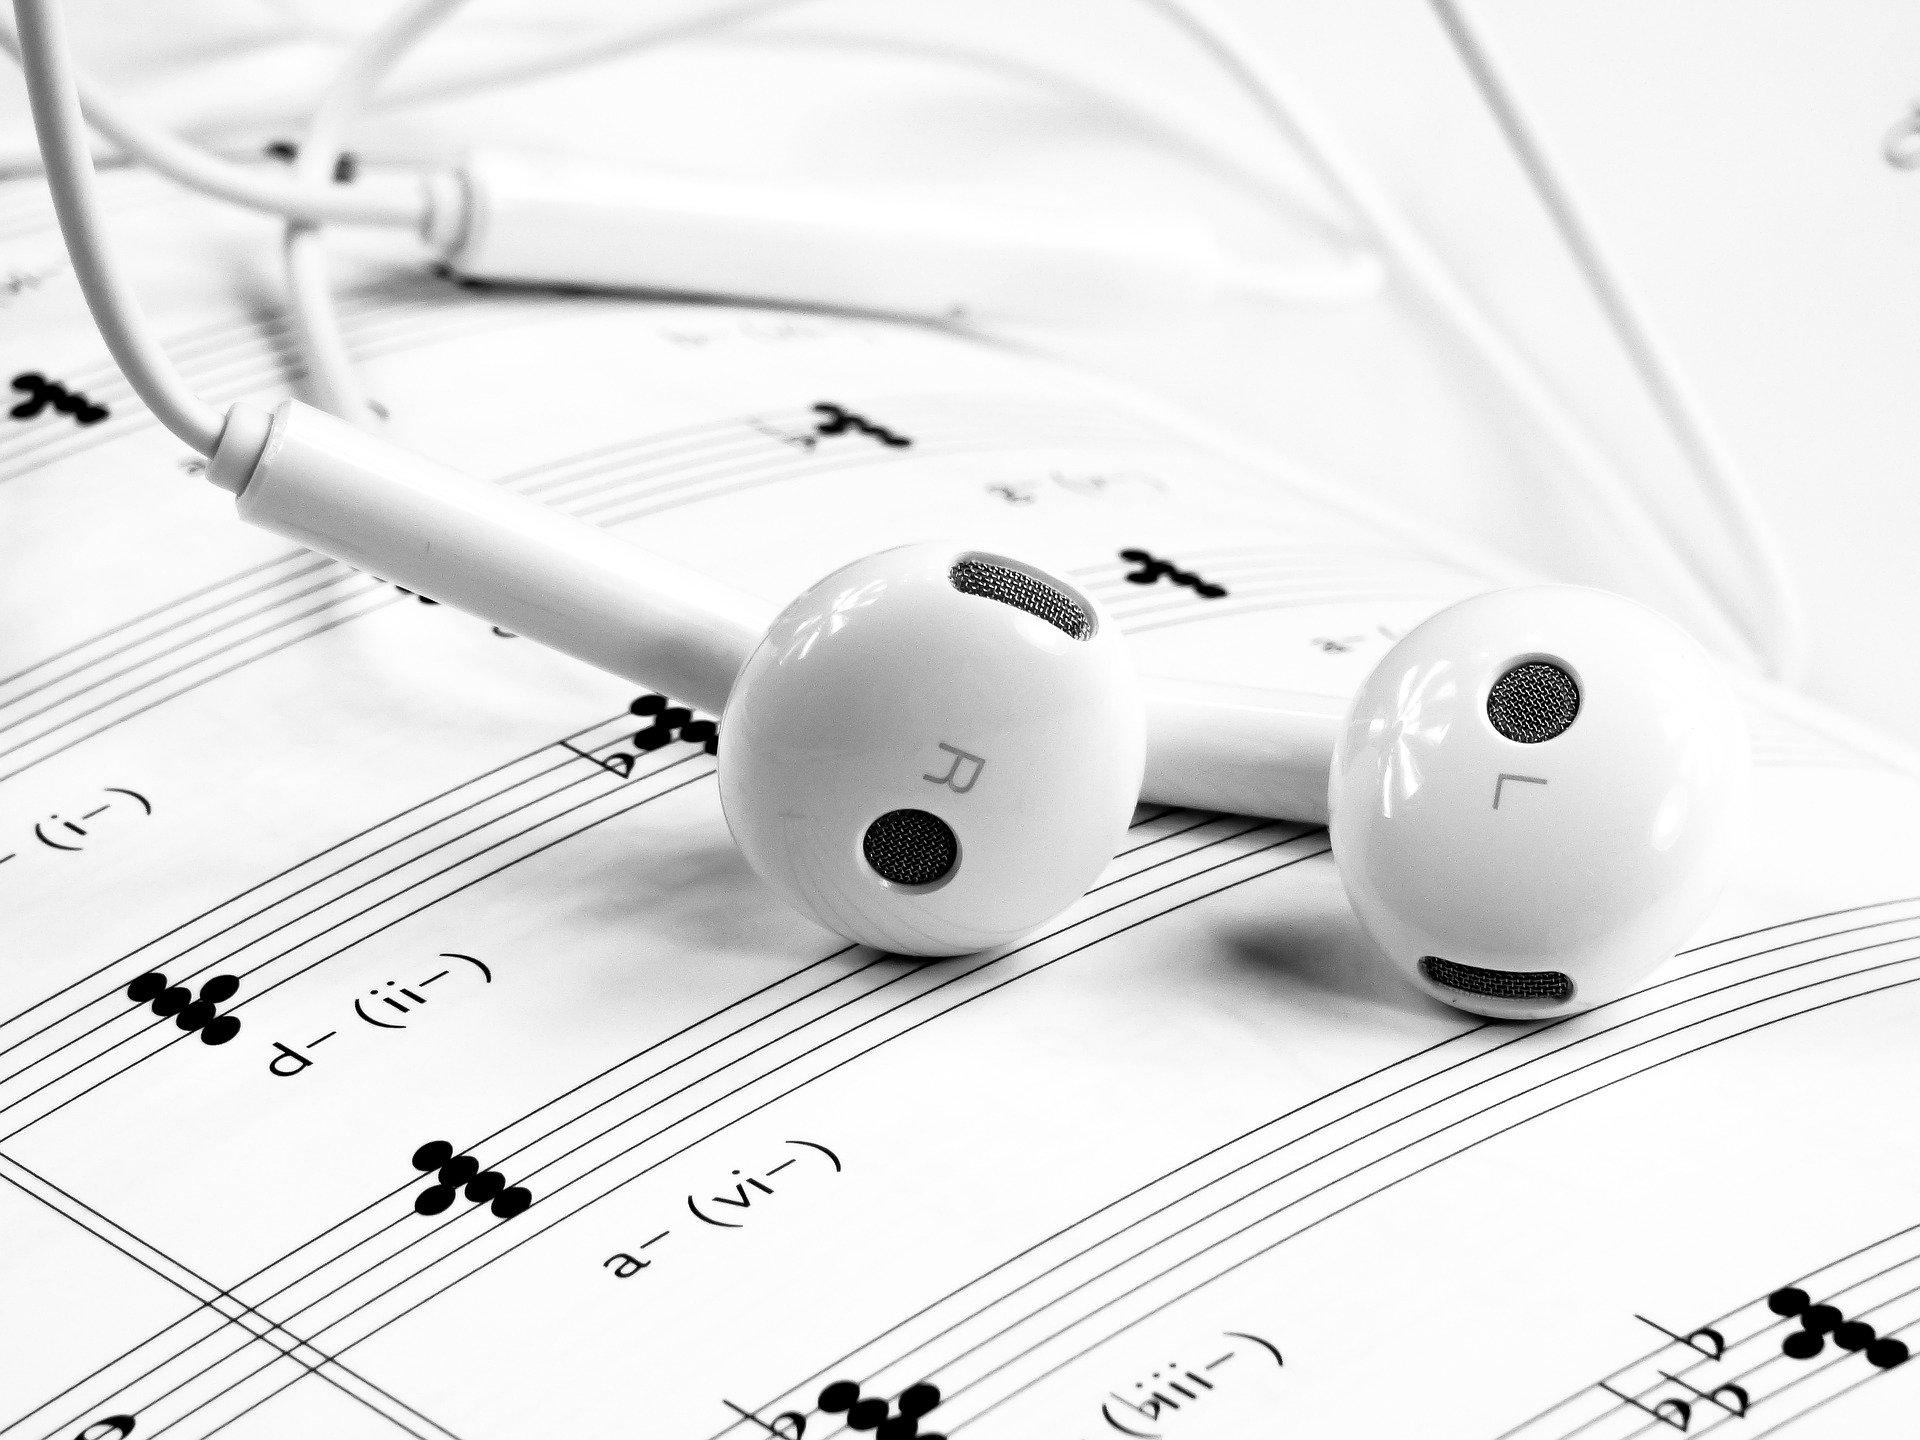 Sheet music and ear buds